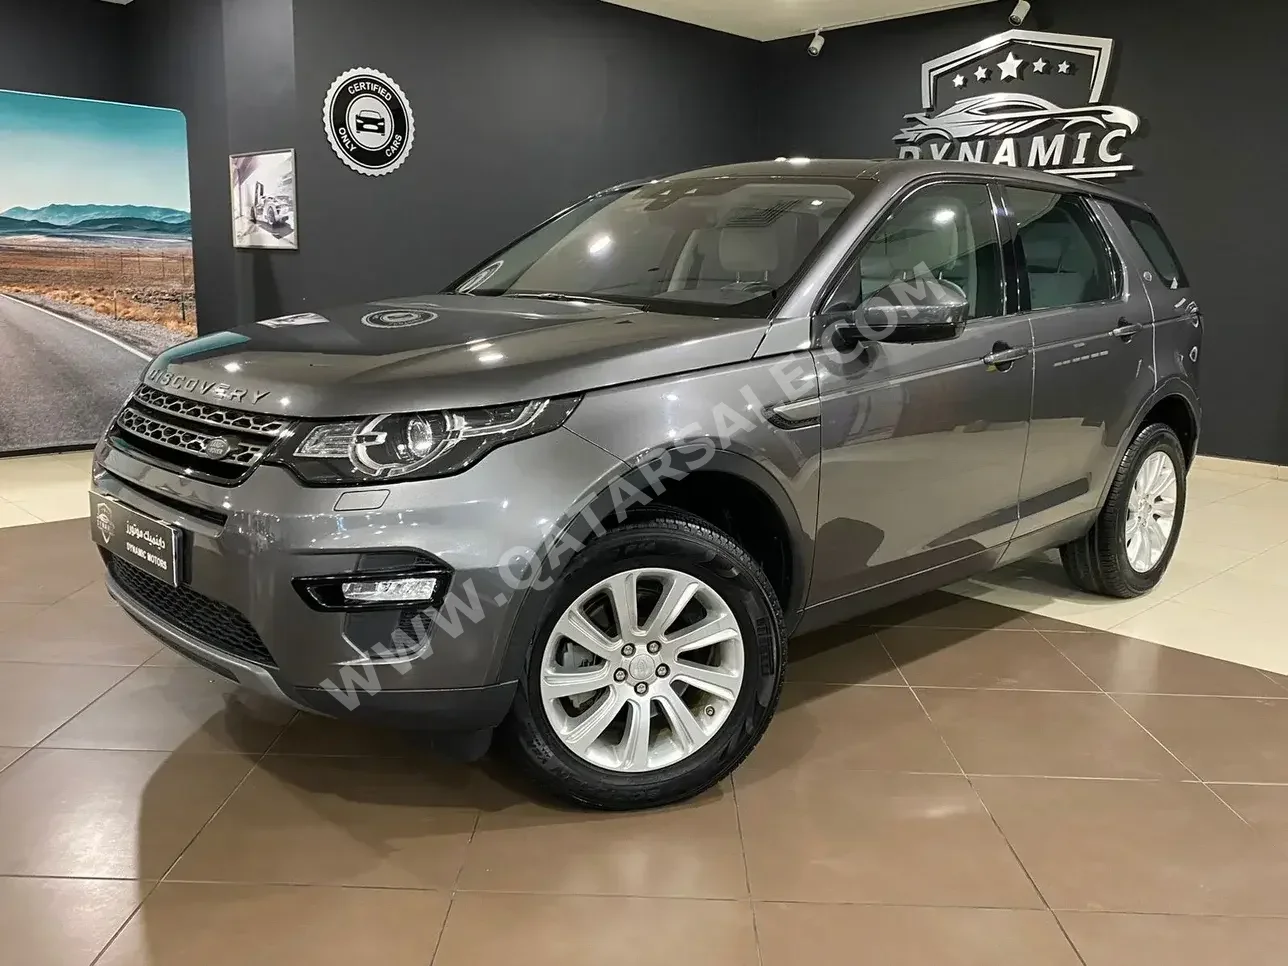 Land Rover  Discovery  Sport  2017  Automatic  29,000 Km  4 Cylinder  All Wheel Drive (AWD)  SUV  Gray